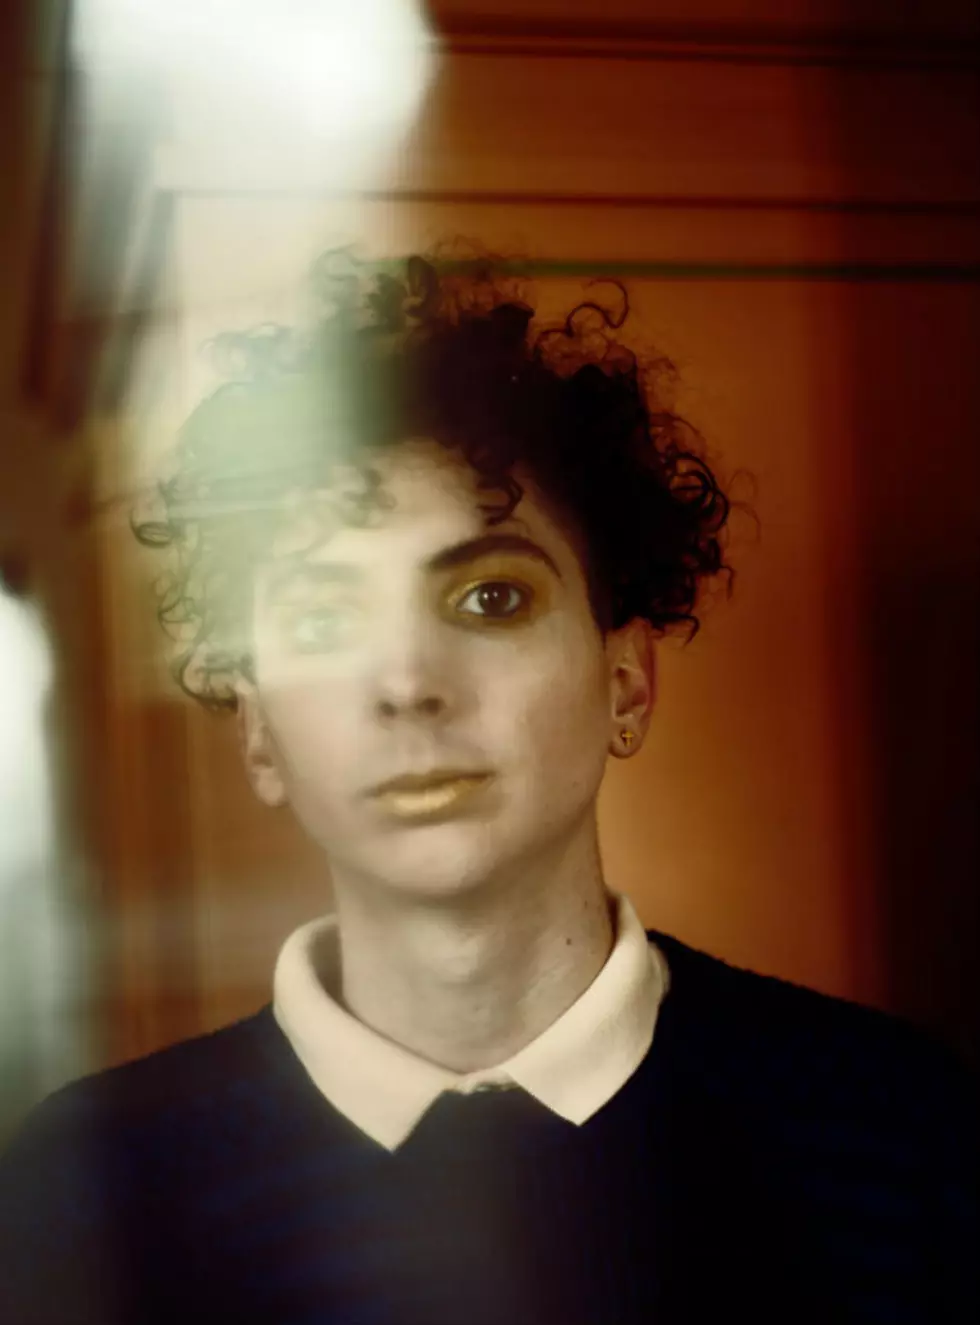 Youth Lagoon Calls It Quits